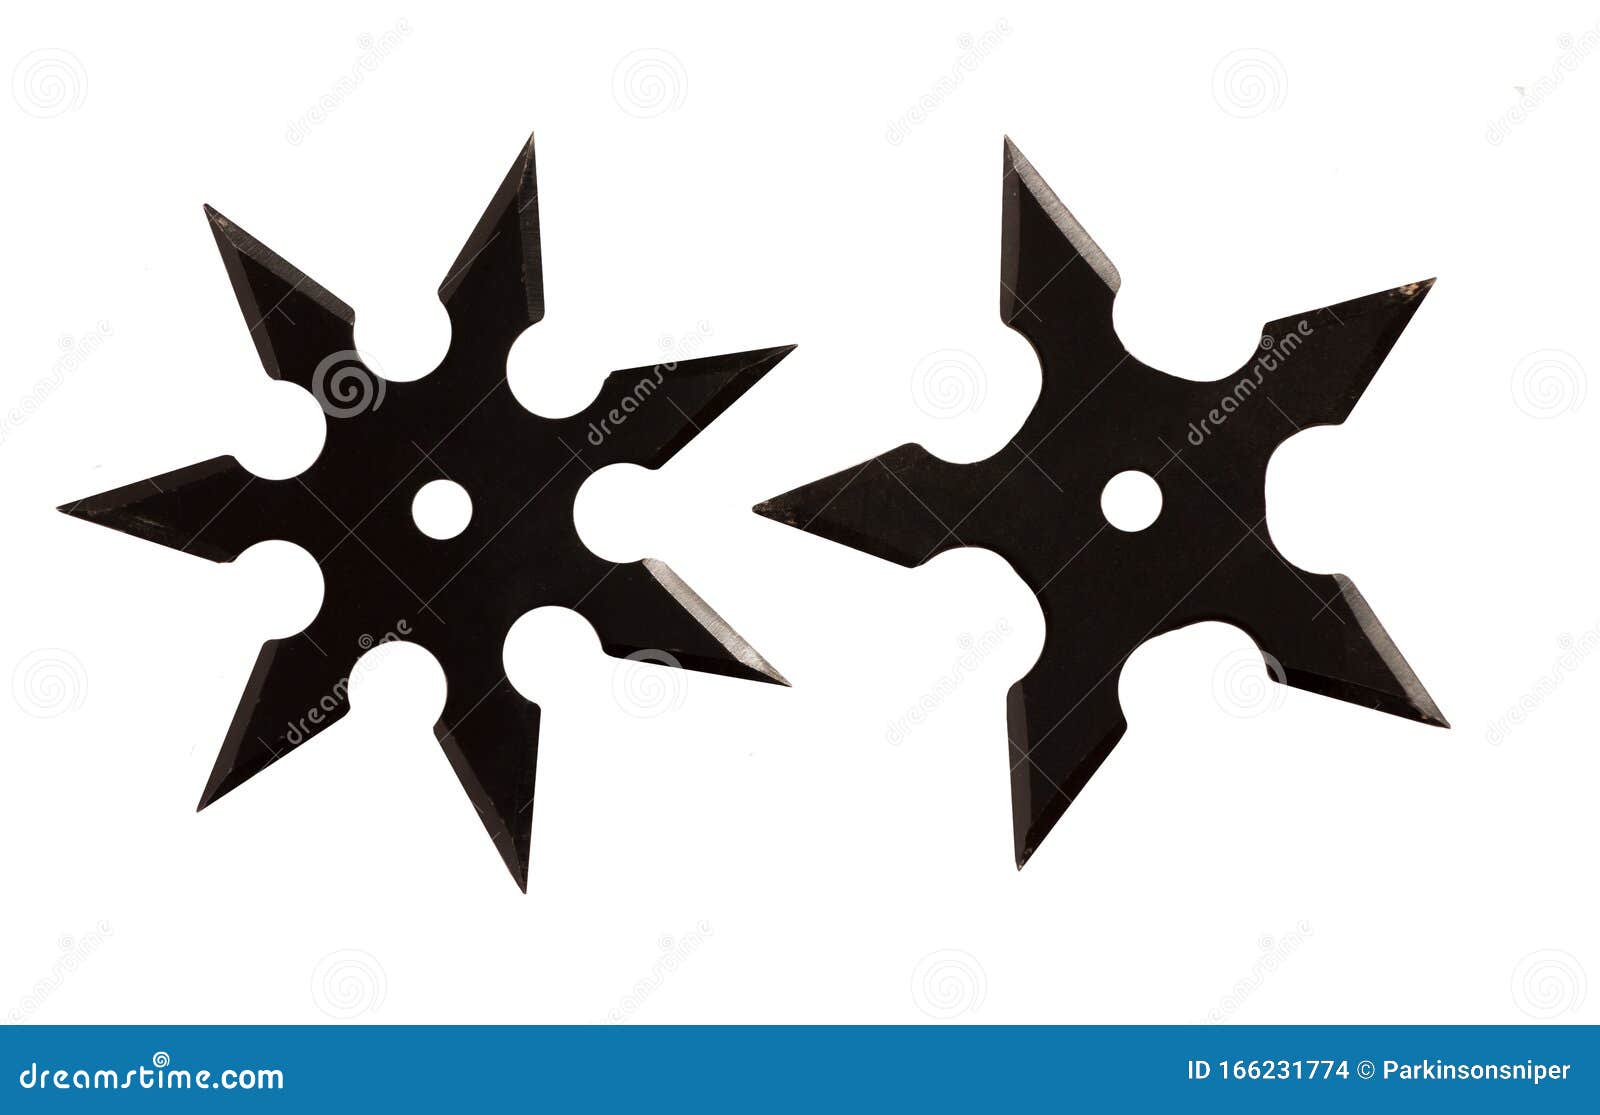 Ninja Star Pictures ...
            </div>

            <a class=